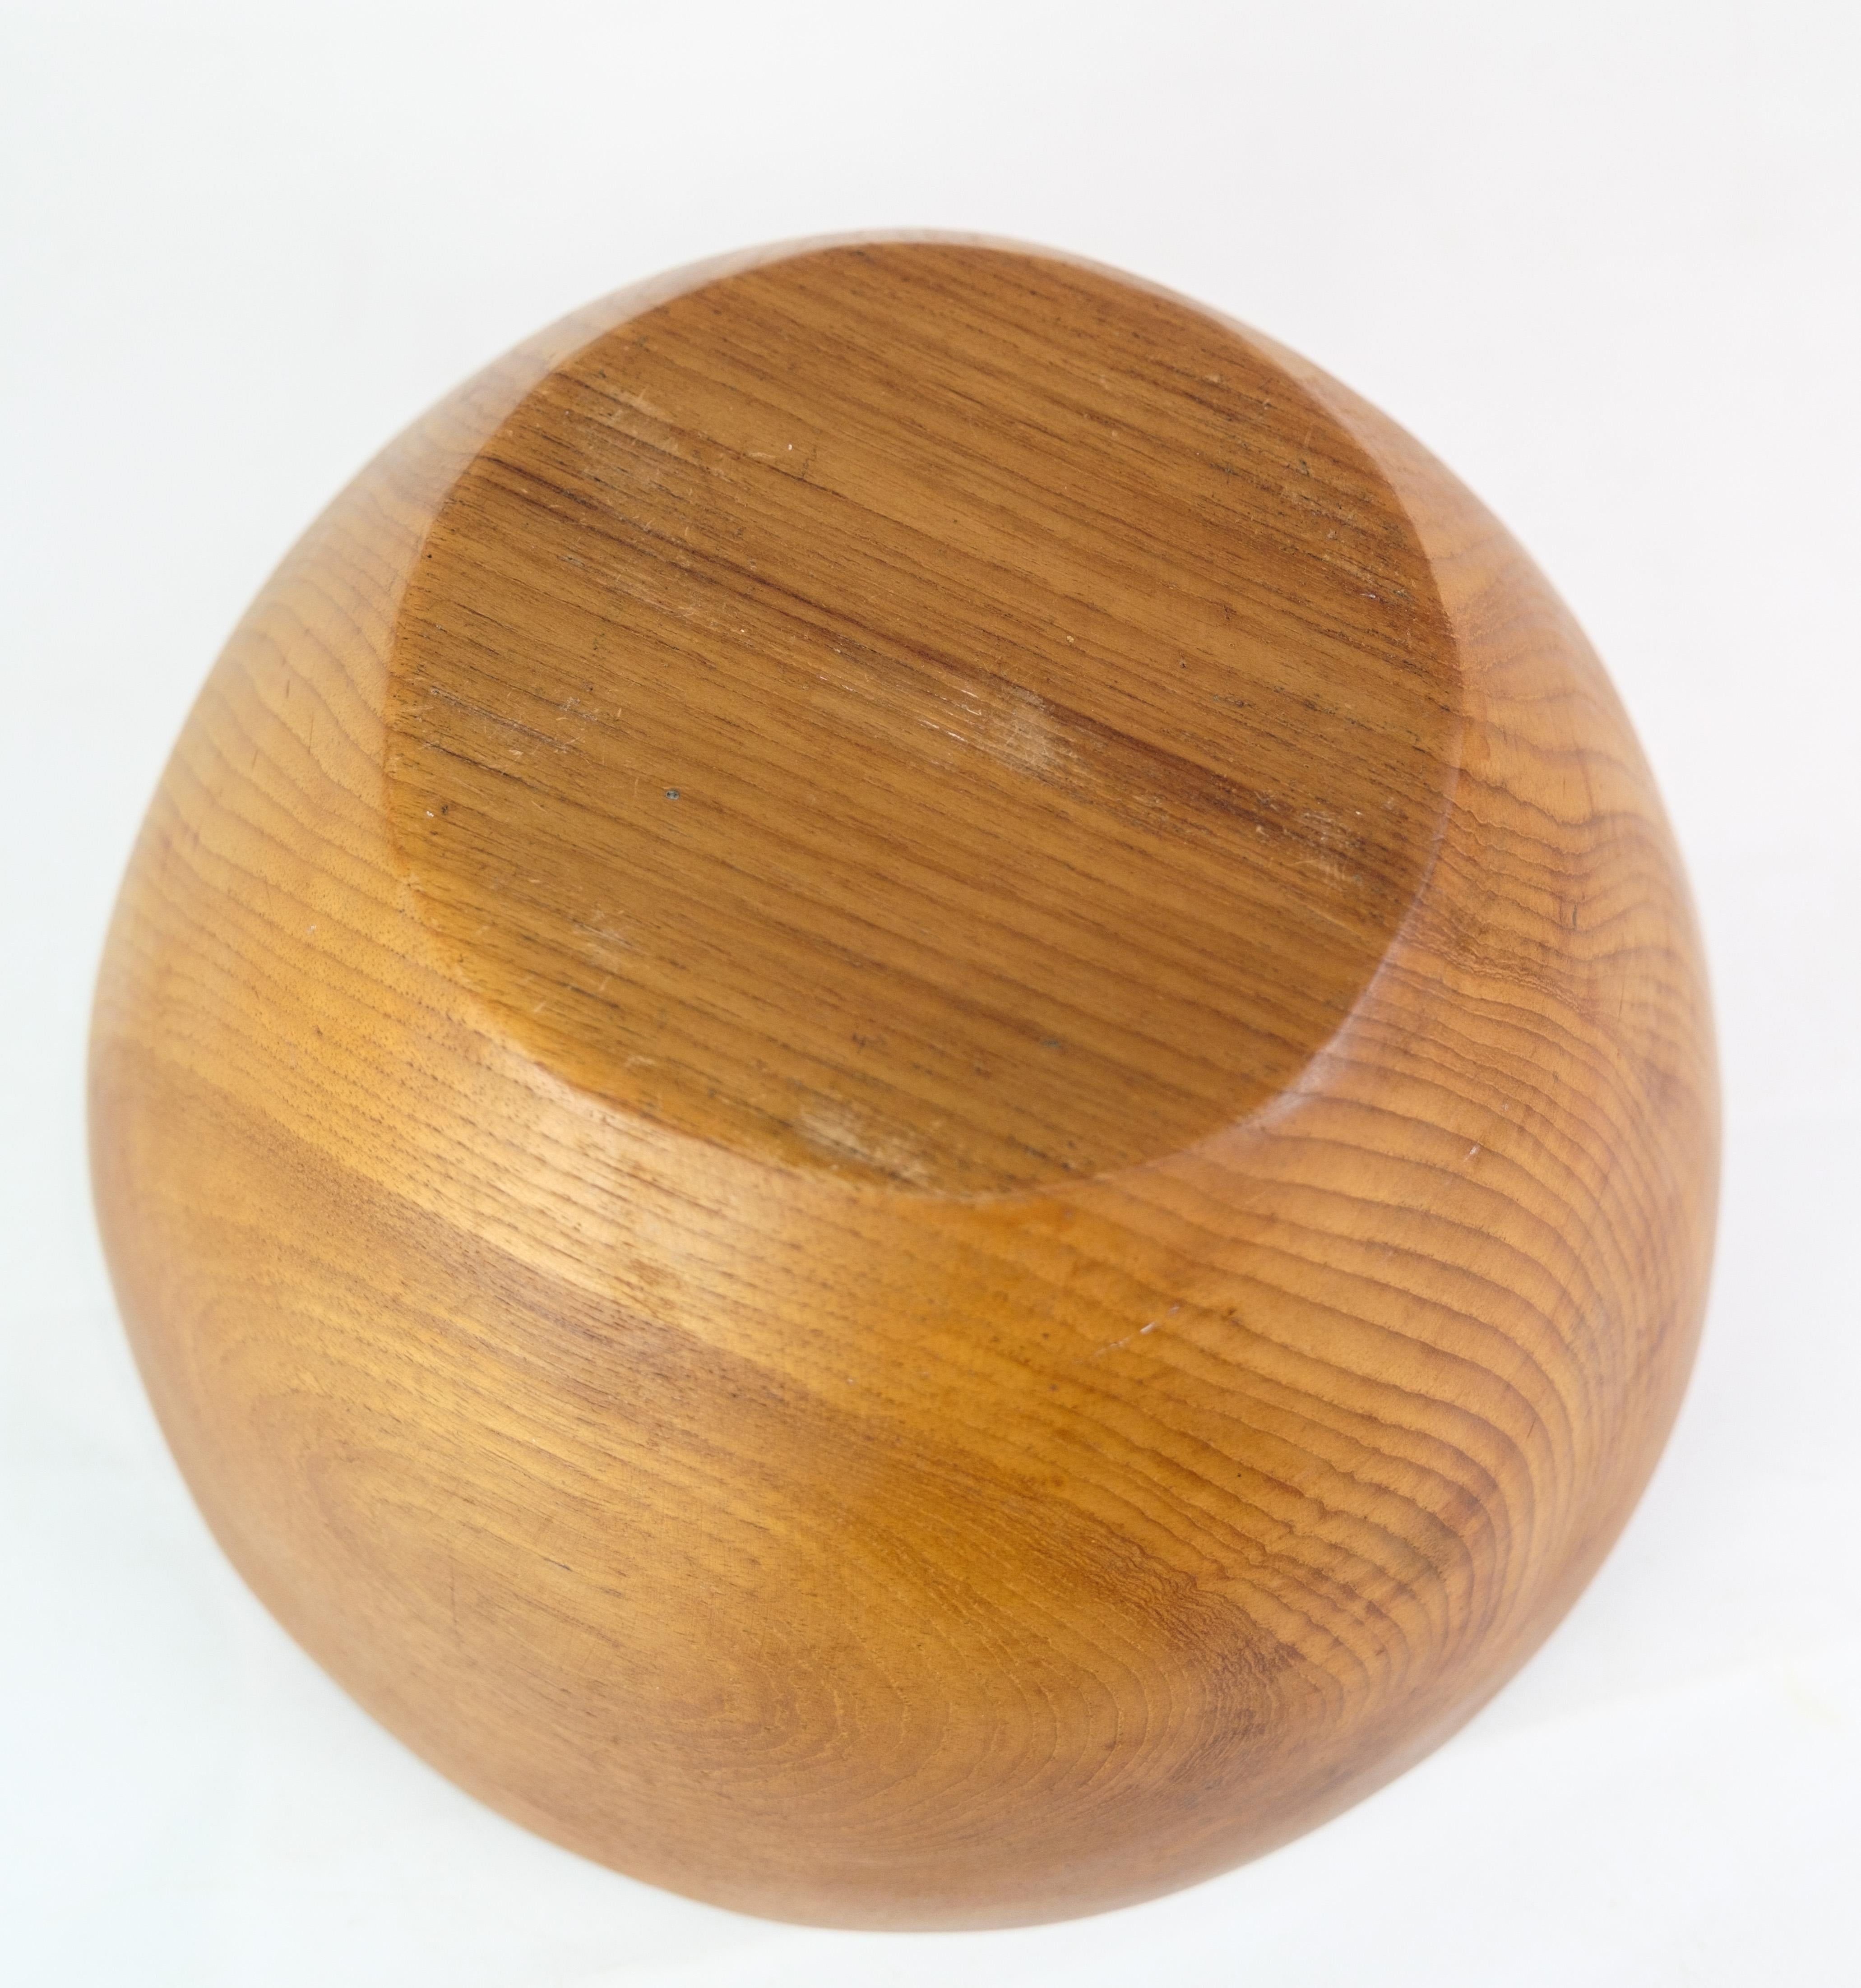 Large teak bowl of Danish design from Denmark, 1960s.

This product will be inspected thoroughly at our professional workshop by our educated employees, who assure the product quality.